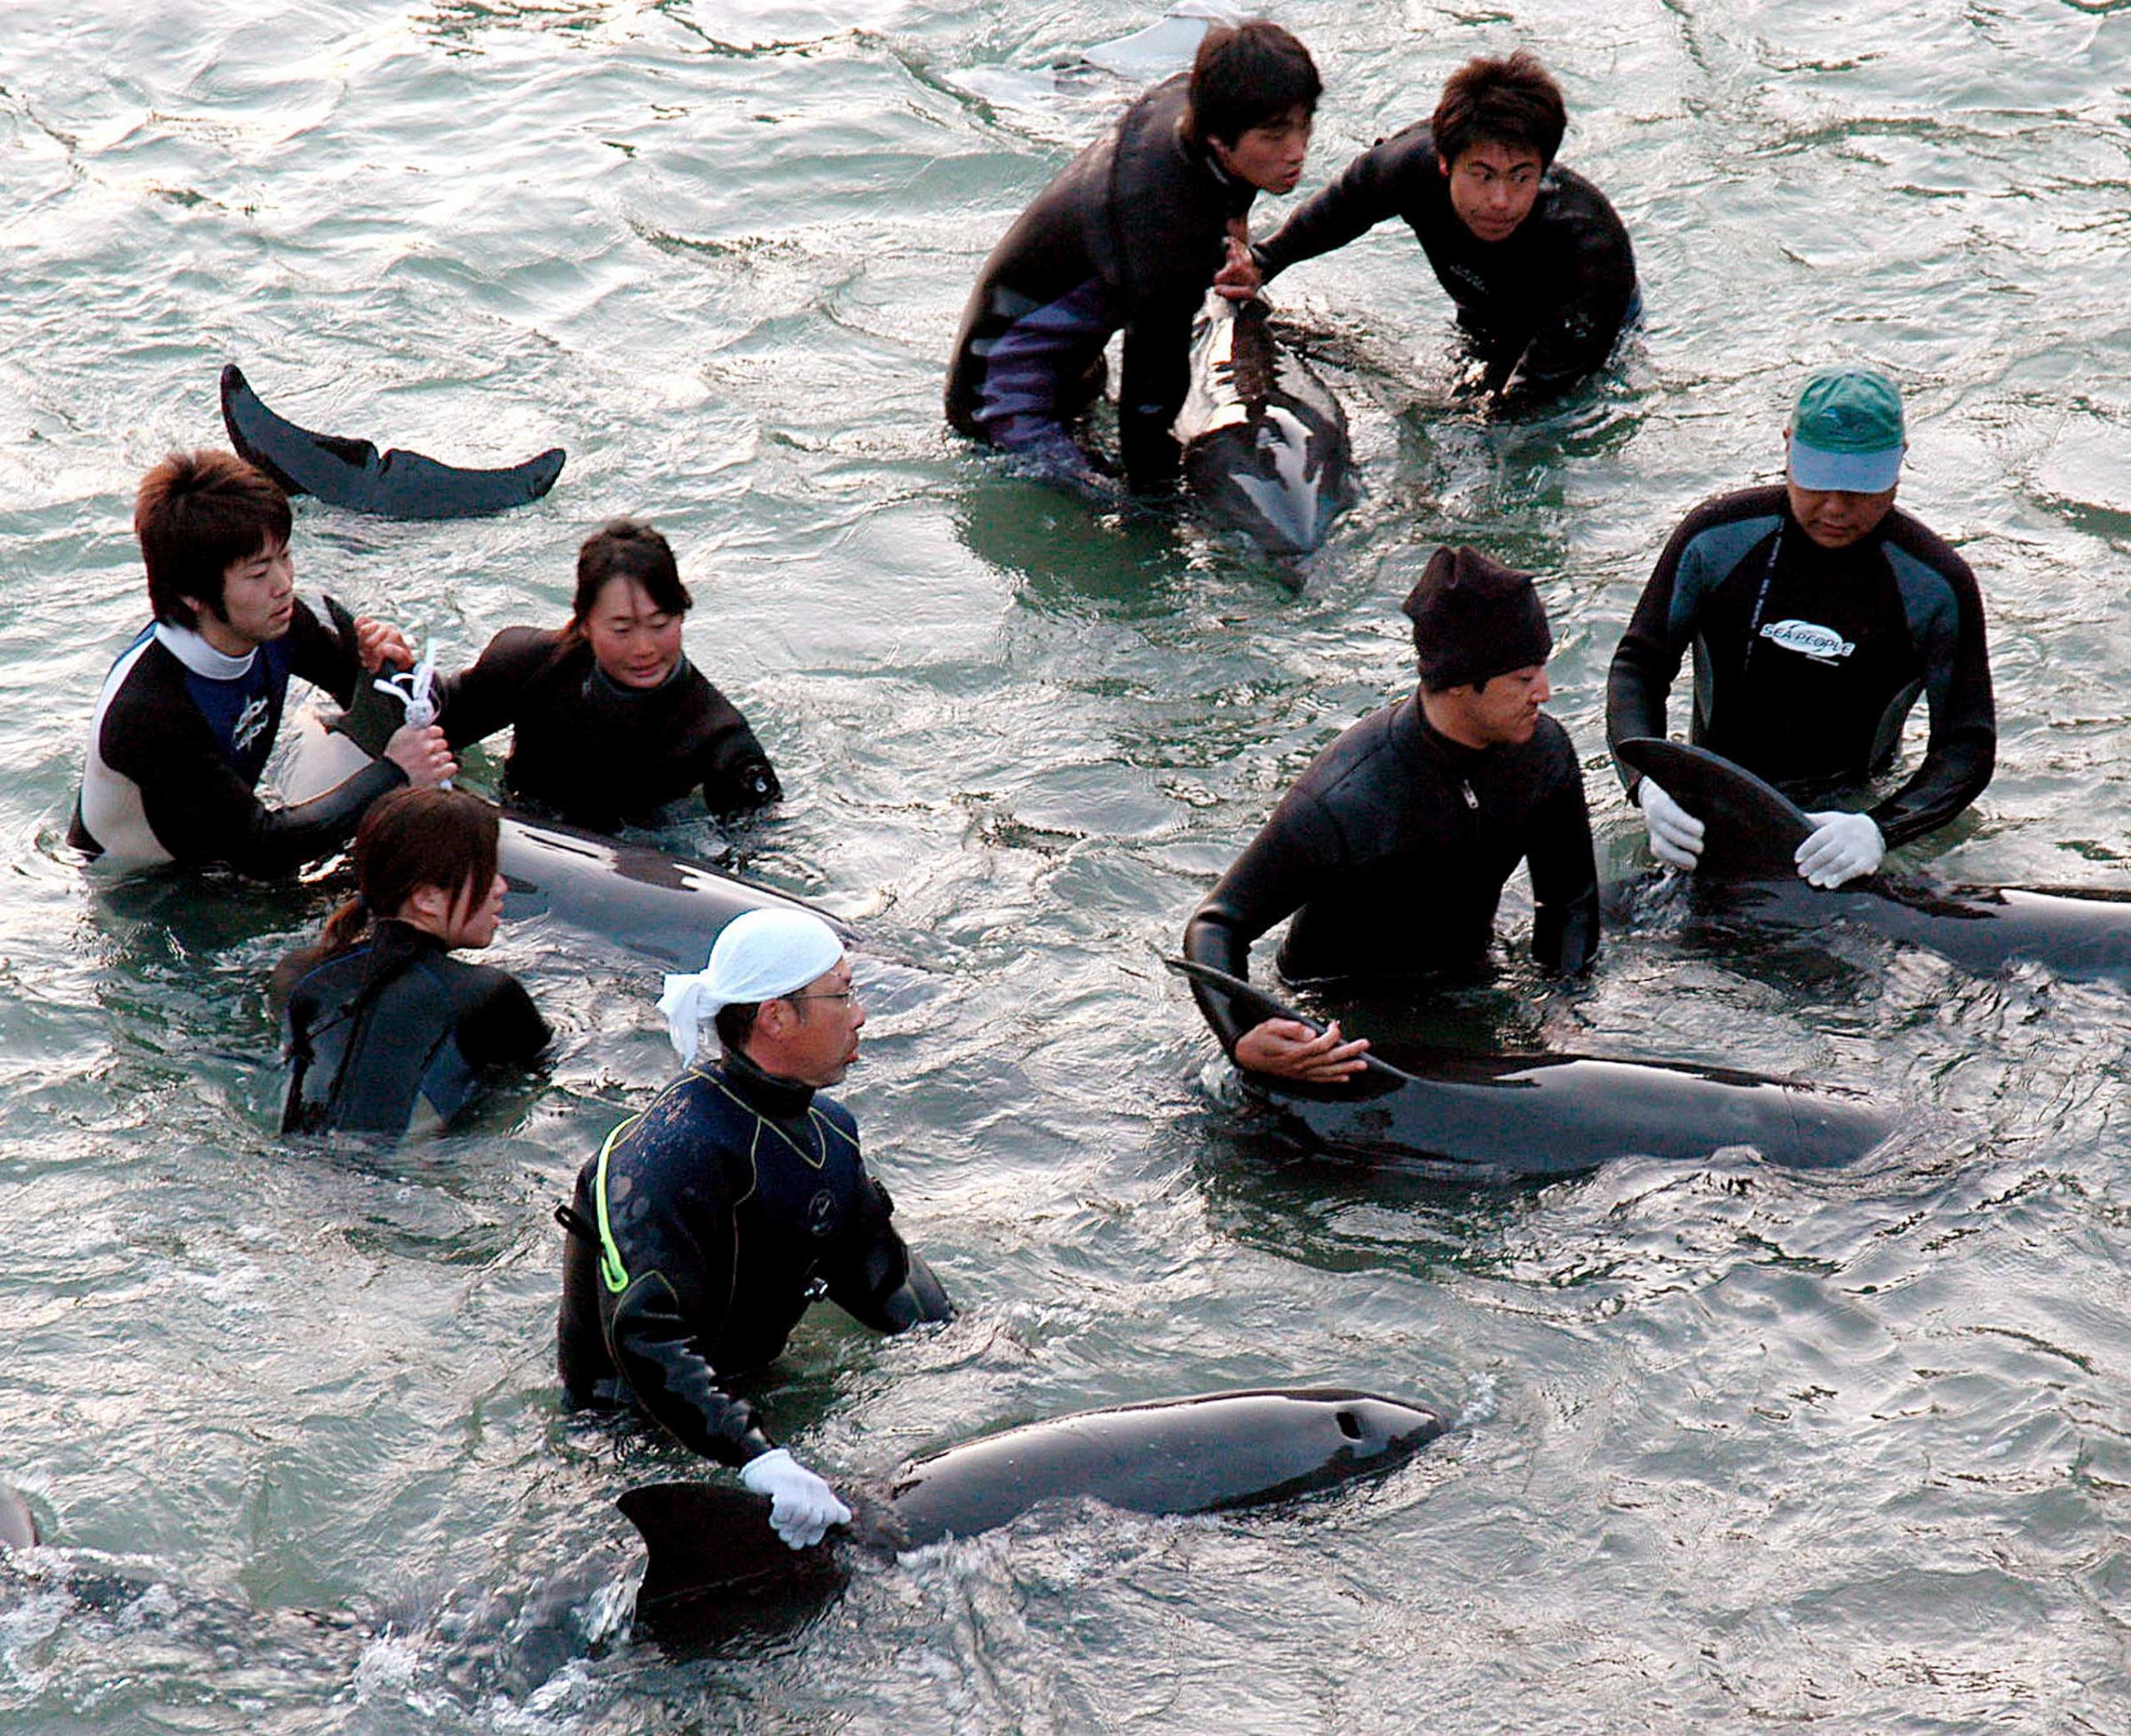 Fishermen trapping a group of dolphins in a holding cove following a large capture of dolphins in Taiji, Japan in 2007.